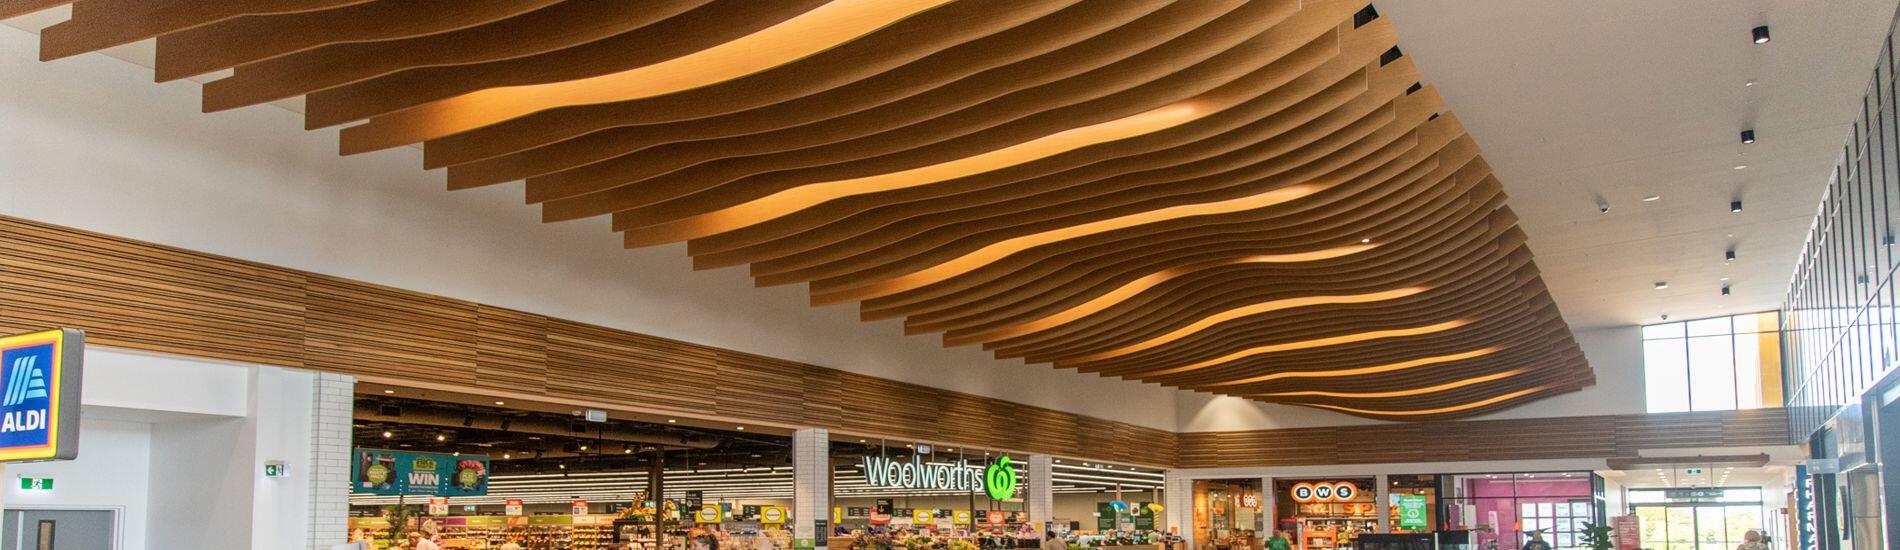 WAVE BLADES Aesthetic Ceiling Suggest Maritime Theme in Shopping Mall